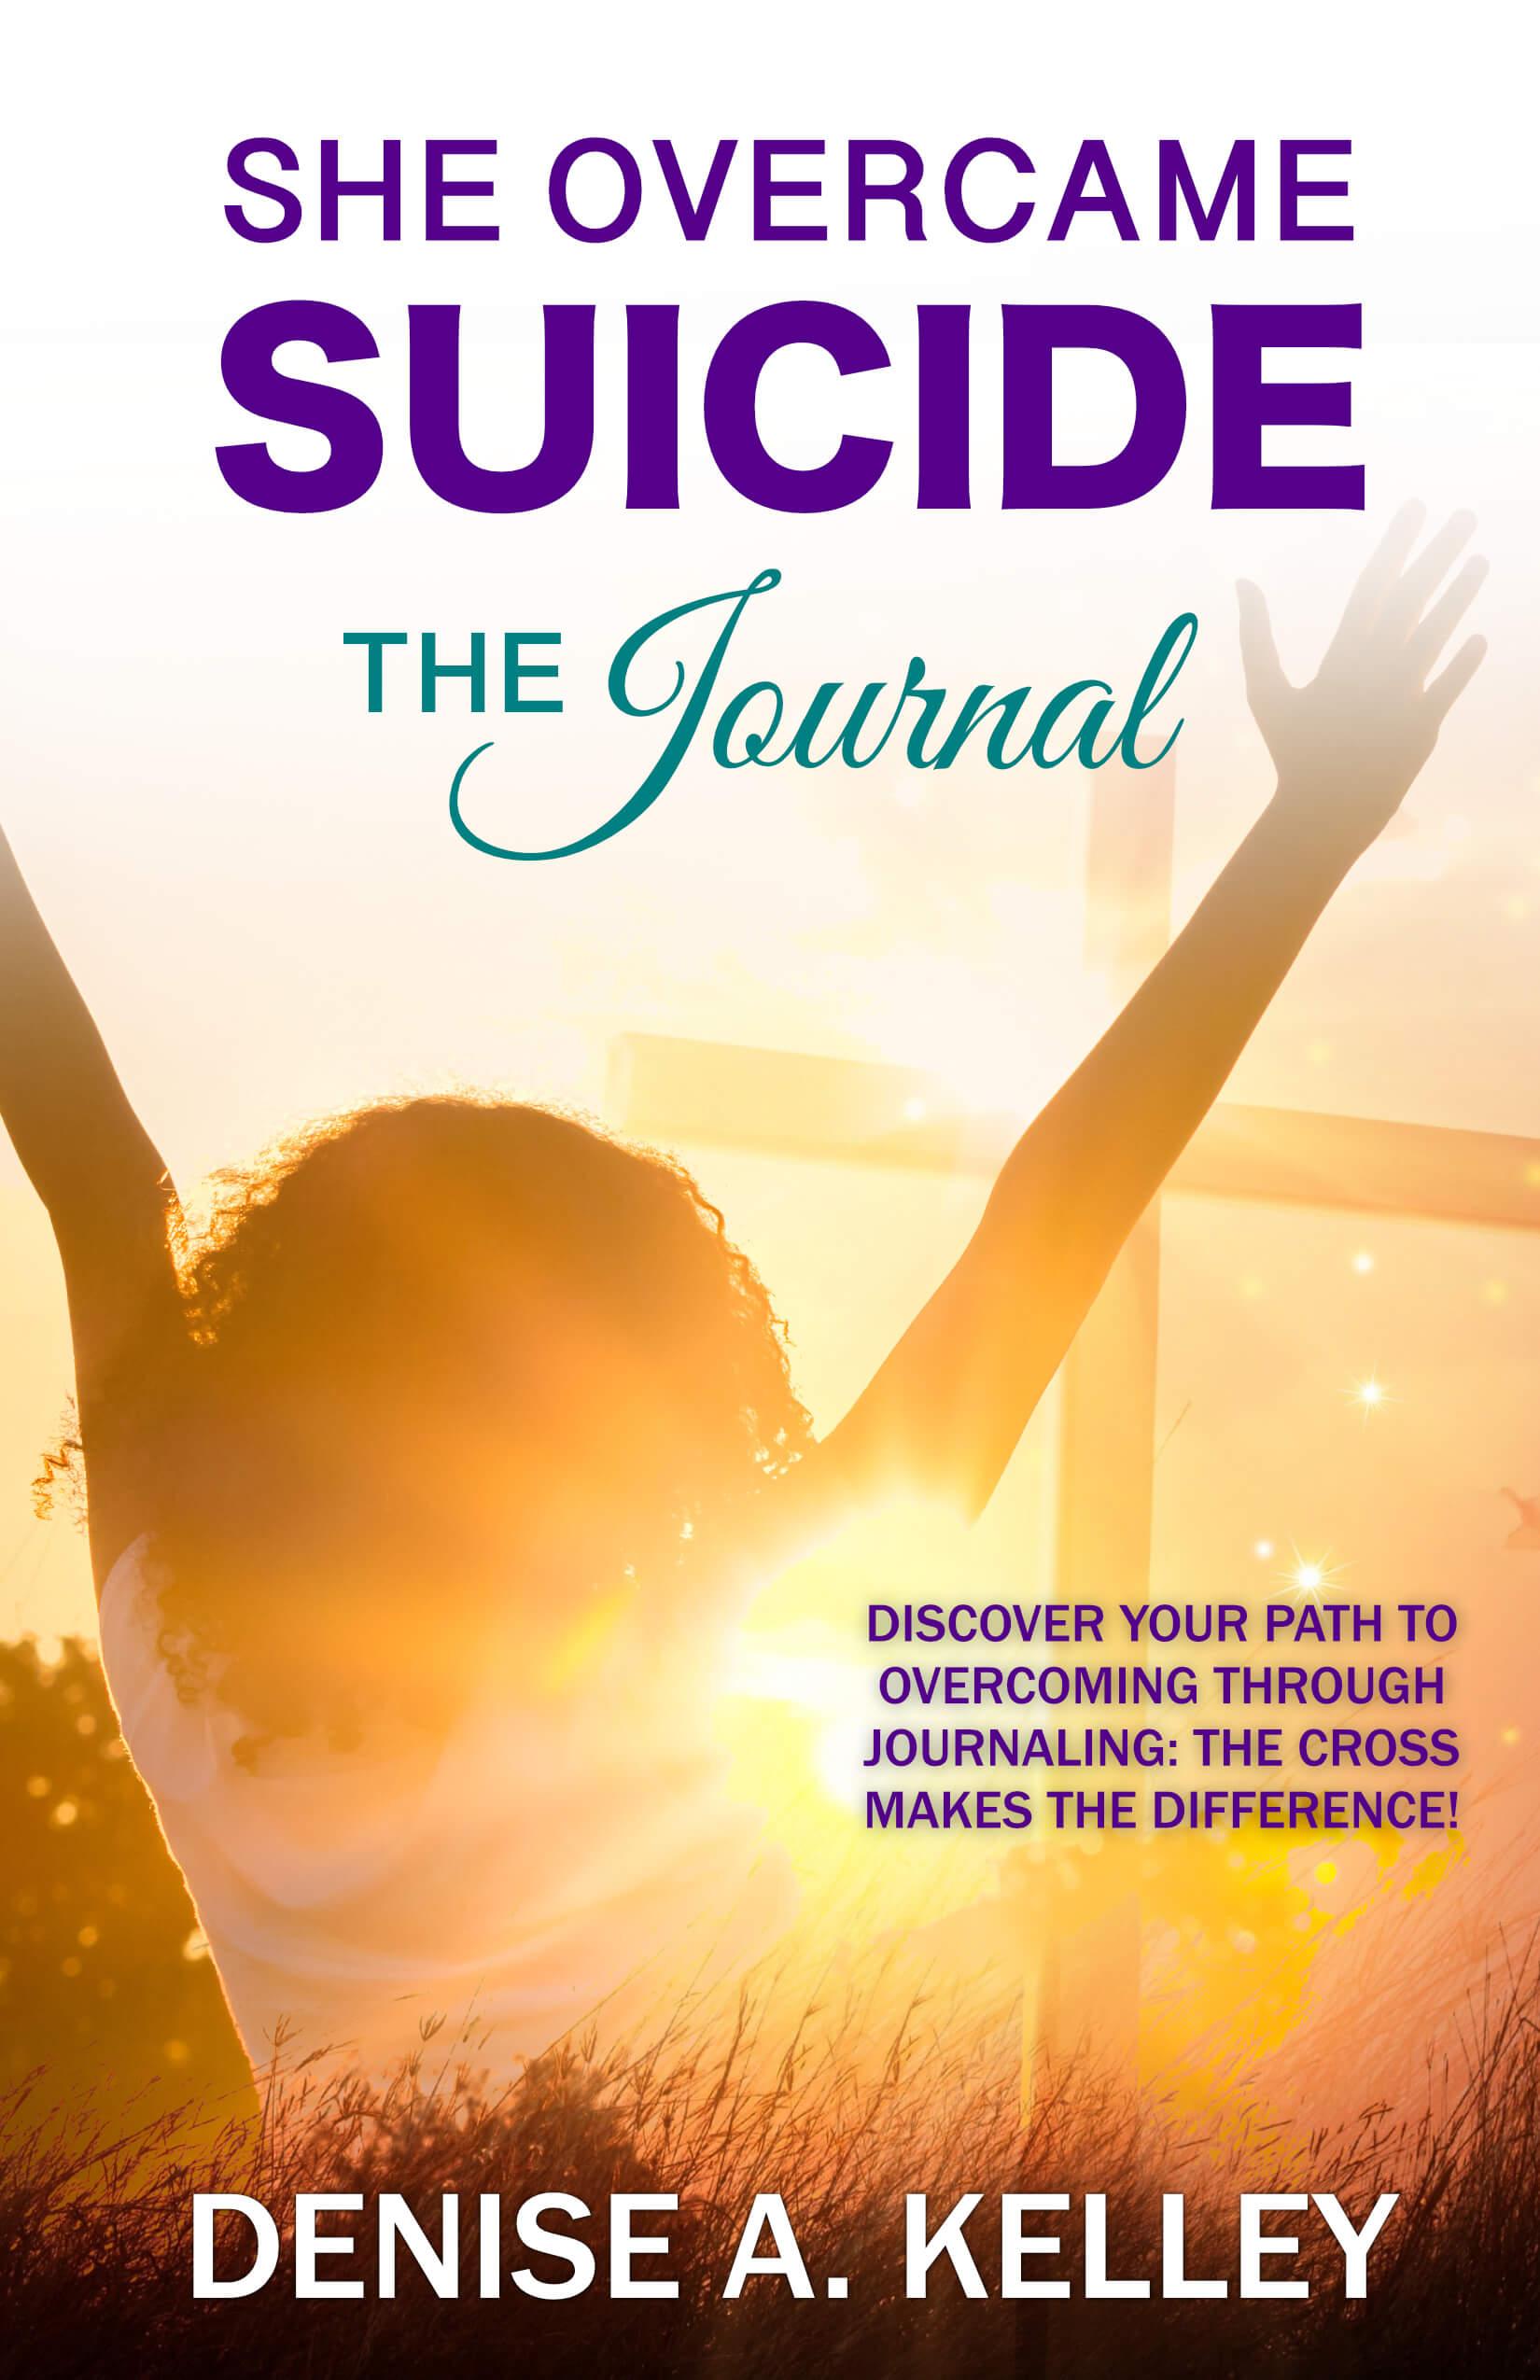 She Overcame Suicide – The Journal